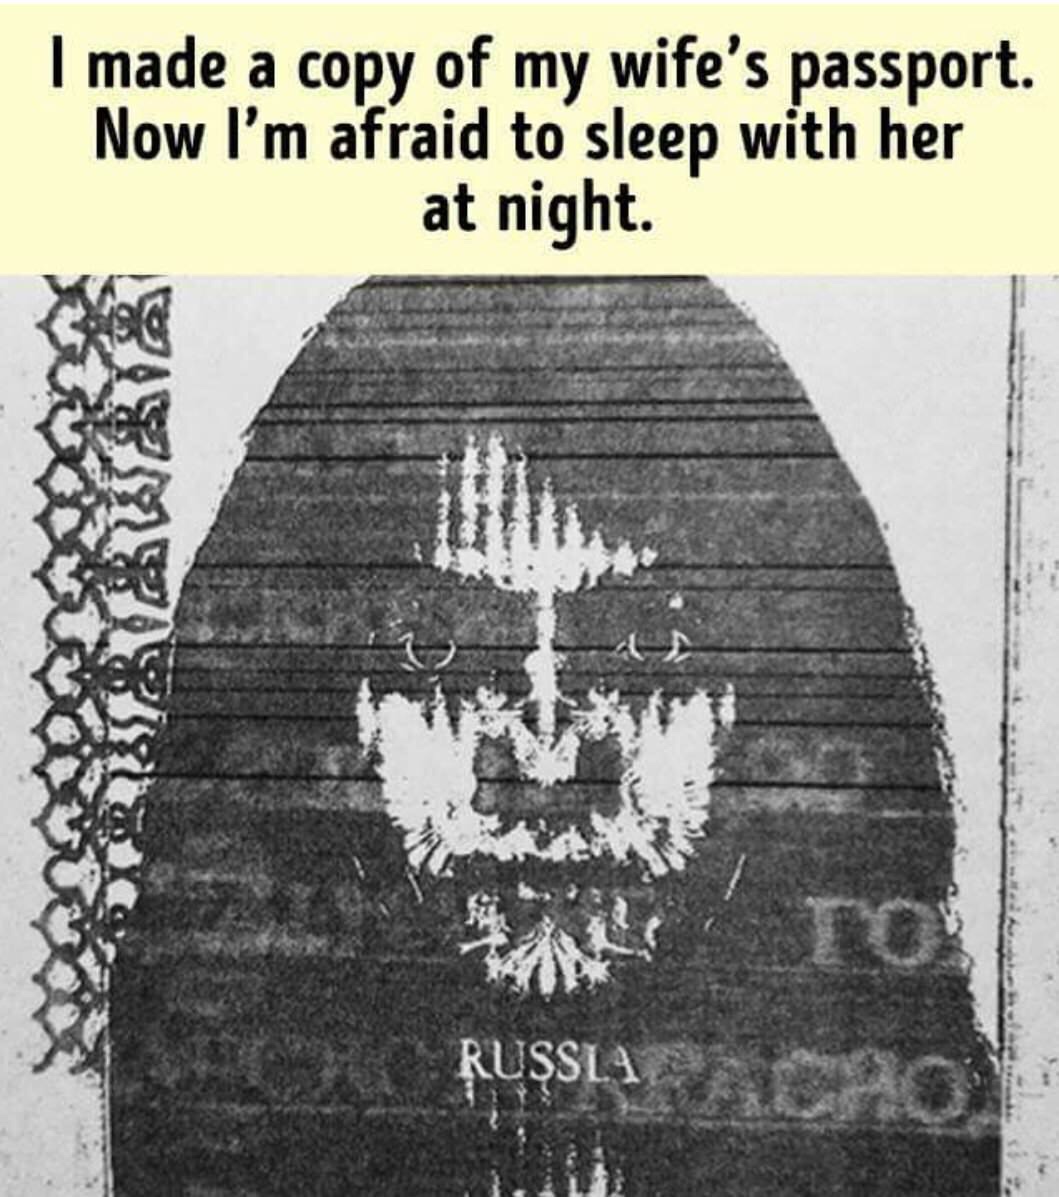 pics and memes - dark humor - I made a copy of my wife's passport. Now I'm afraid to sleep with her at night. Russla